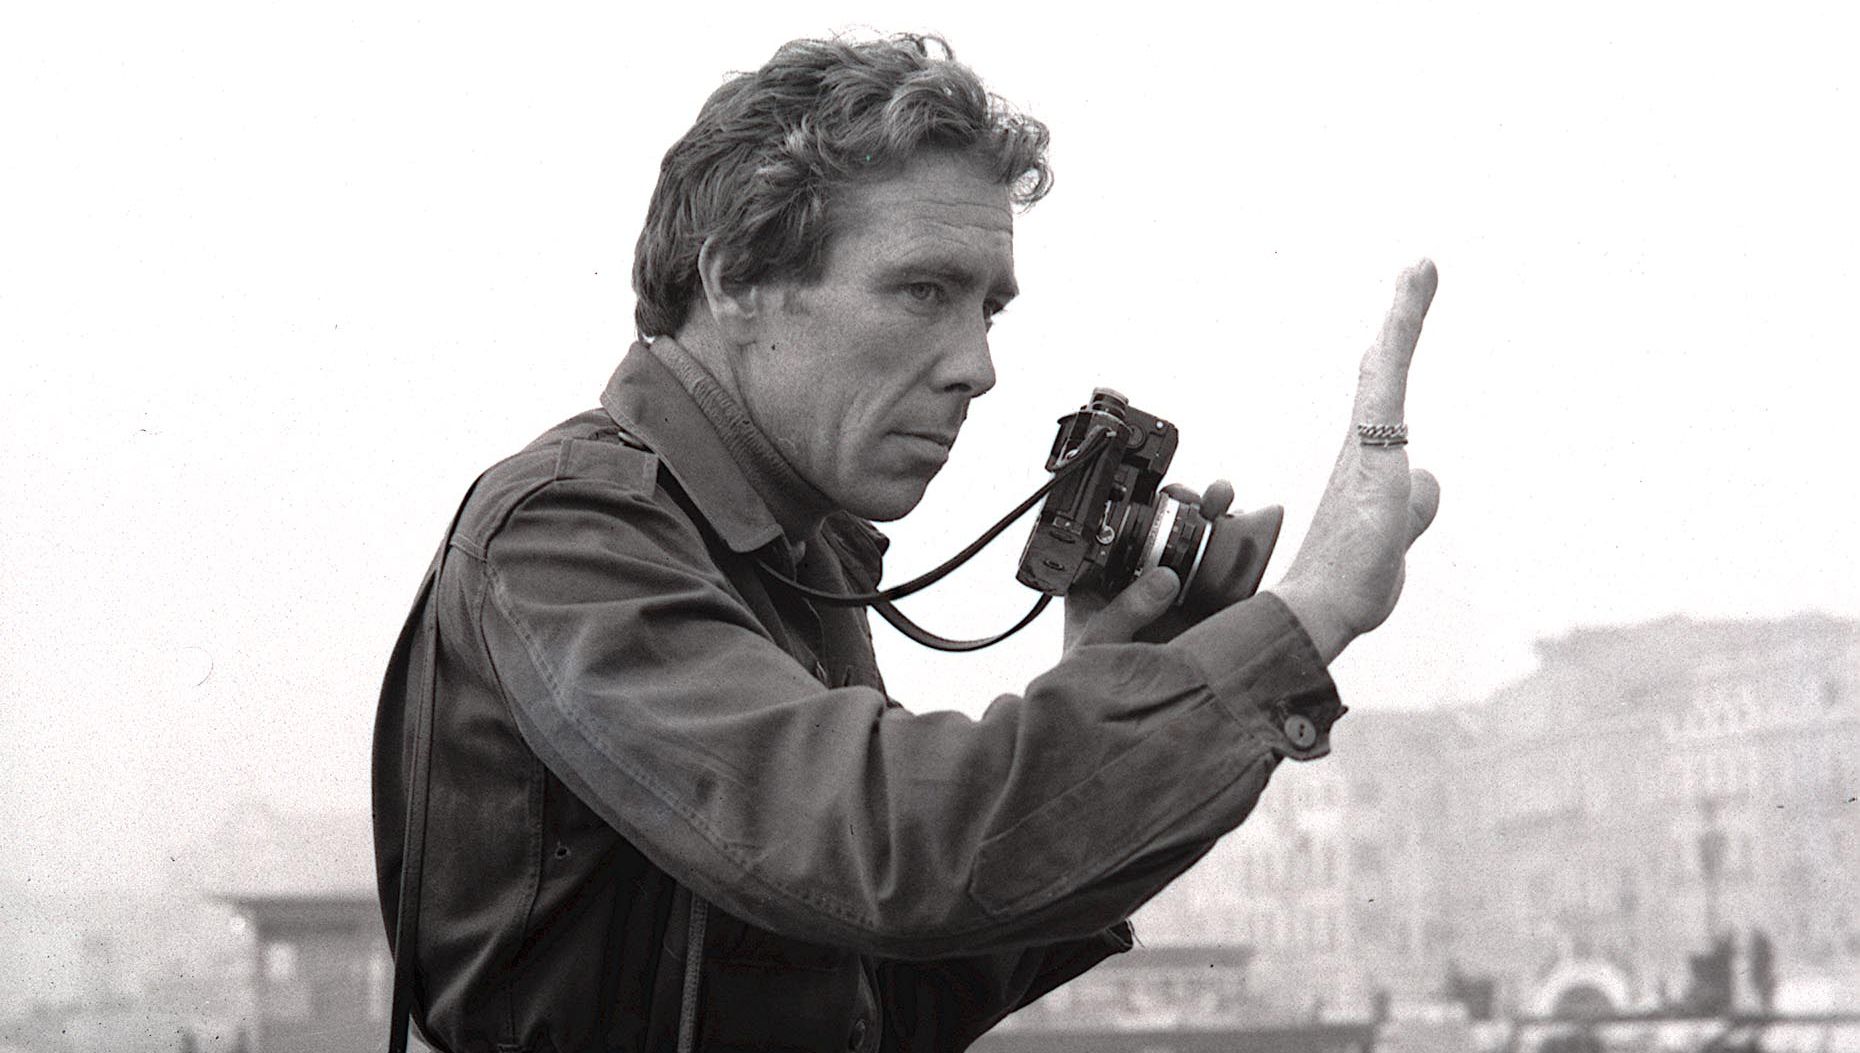 Venice, Italy, 14th October 1971, Photographer Lord Snowdon, husband of Princess Margaret, pictured at work in Venice